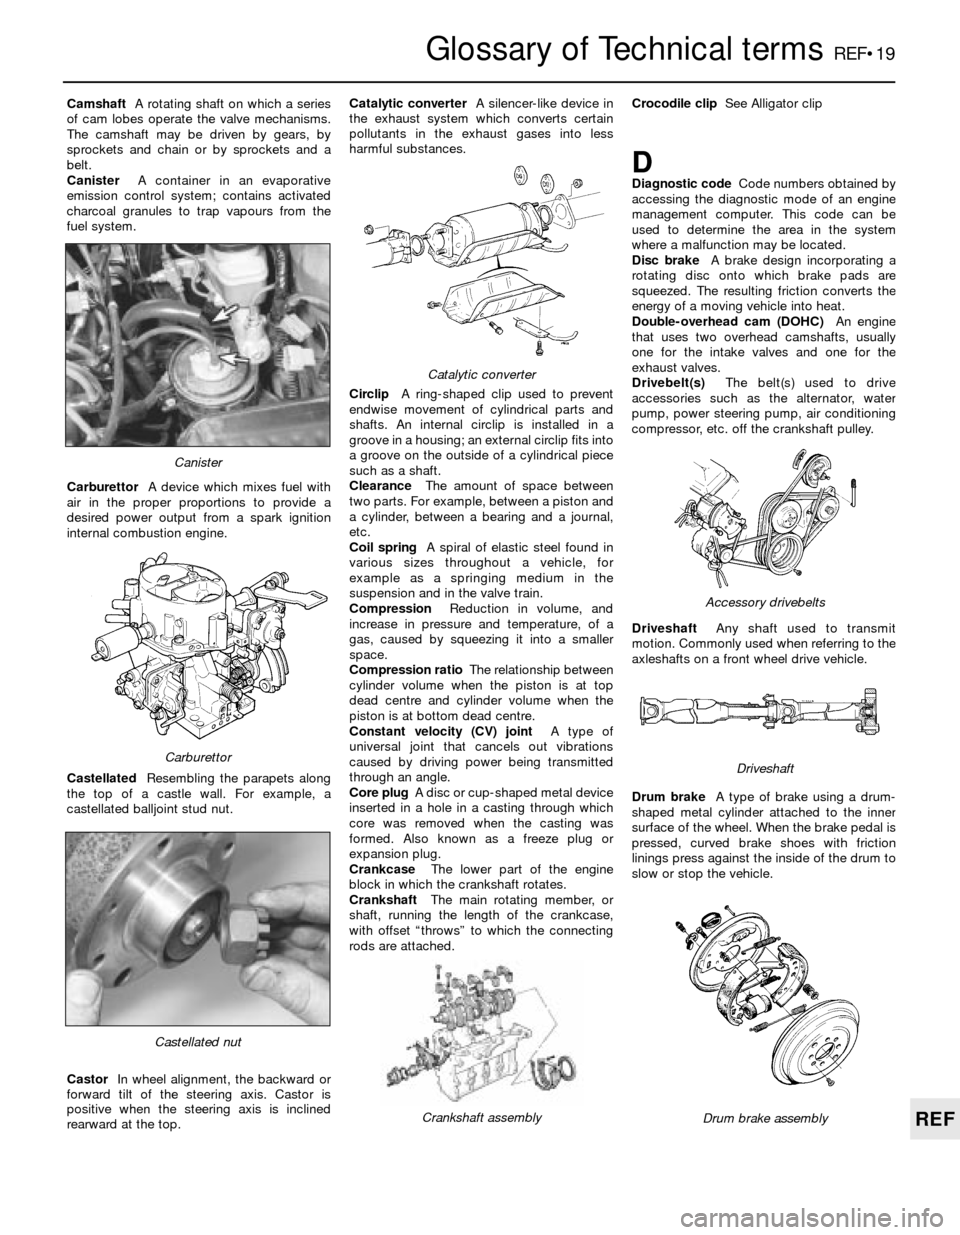 FORD SIERRA 1989 2.G Reference Workshop Manual Glossary of Technical termsREF•19
REF
CamshaftA rotating shaft on which a series
of cam lobes operate the valve mechanisms.
The camshaft may be driven by gears, by
sprockets and chain or by sprocket